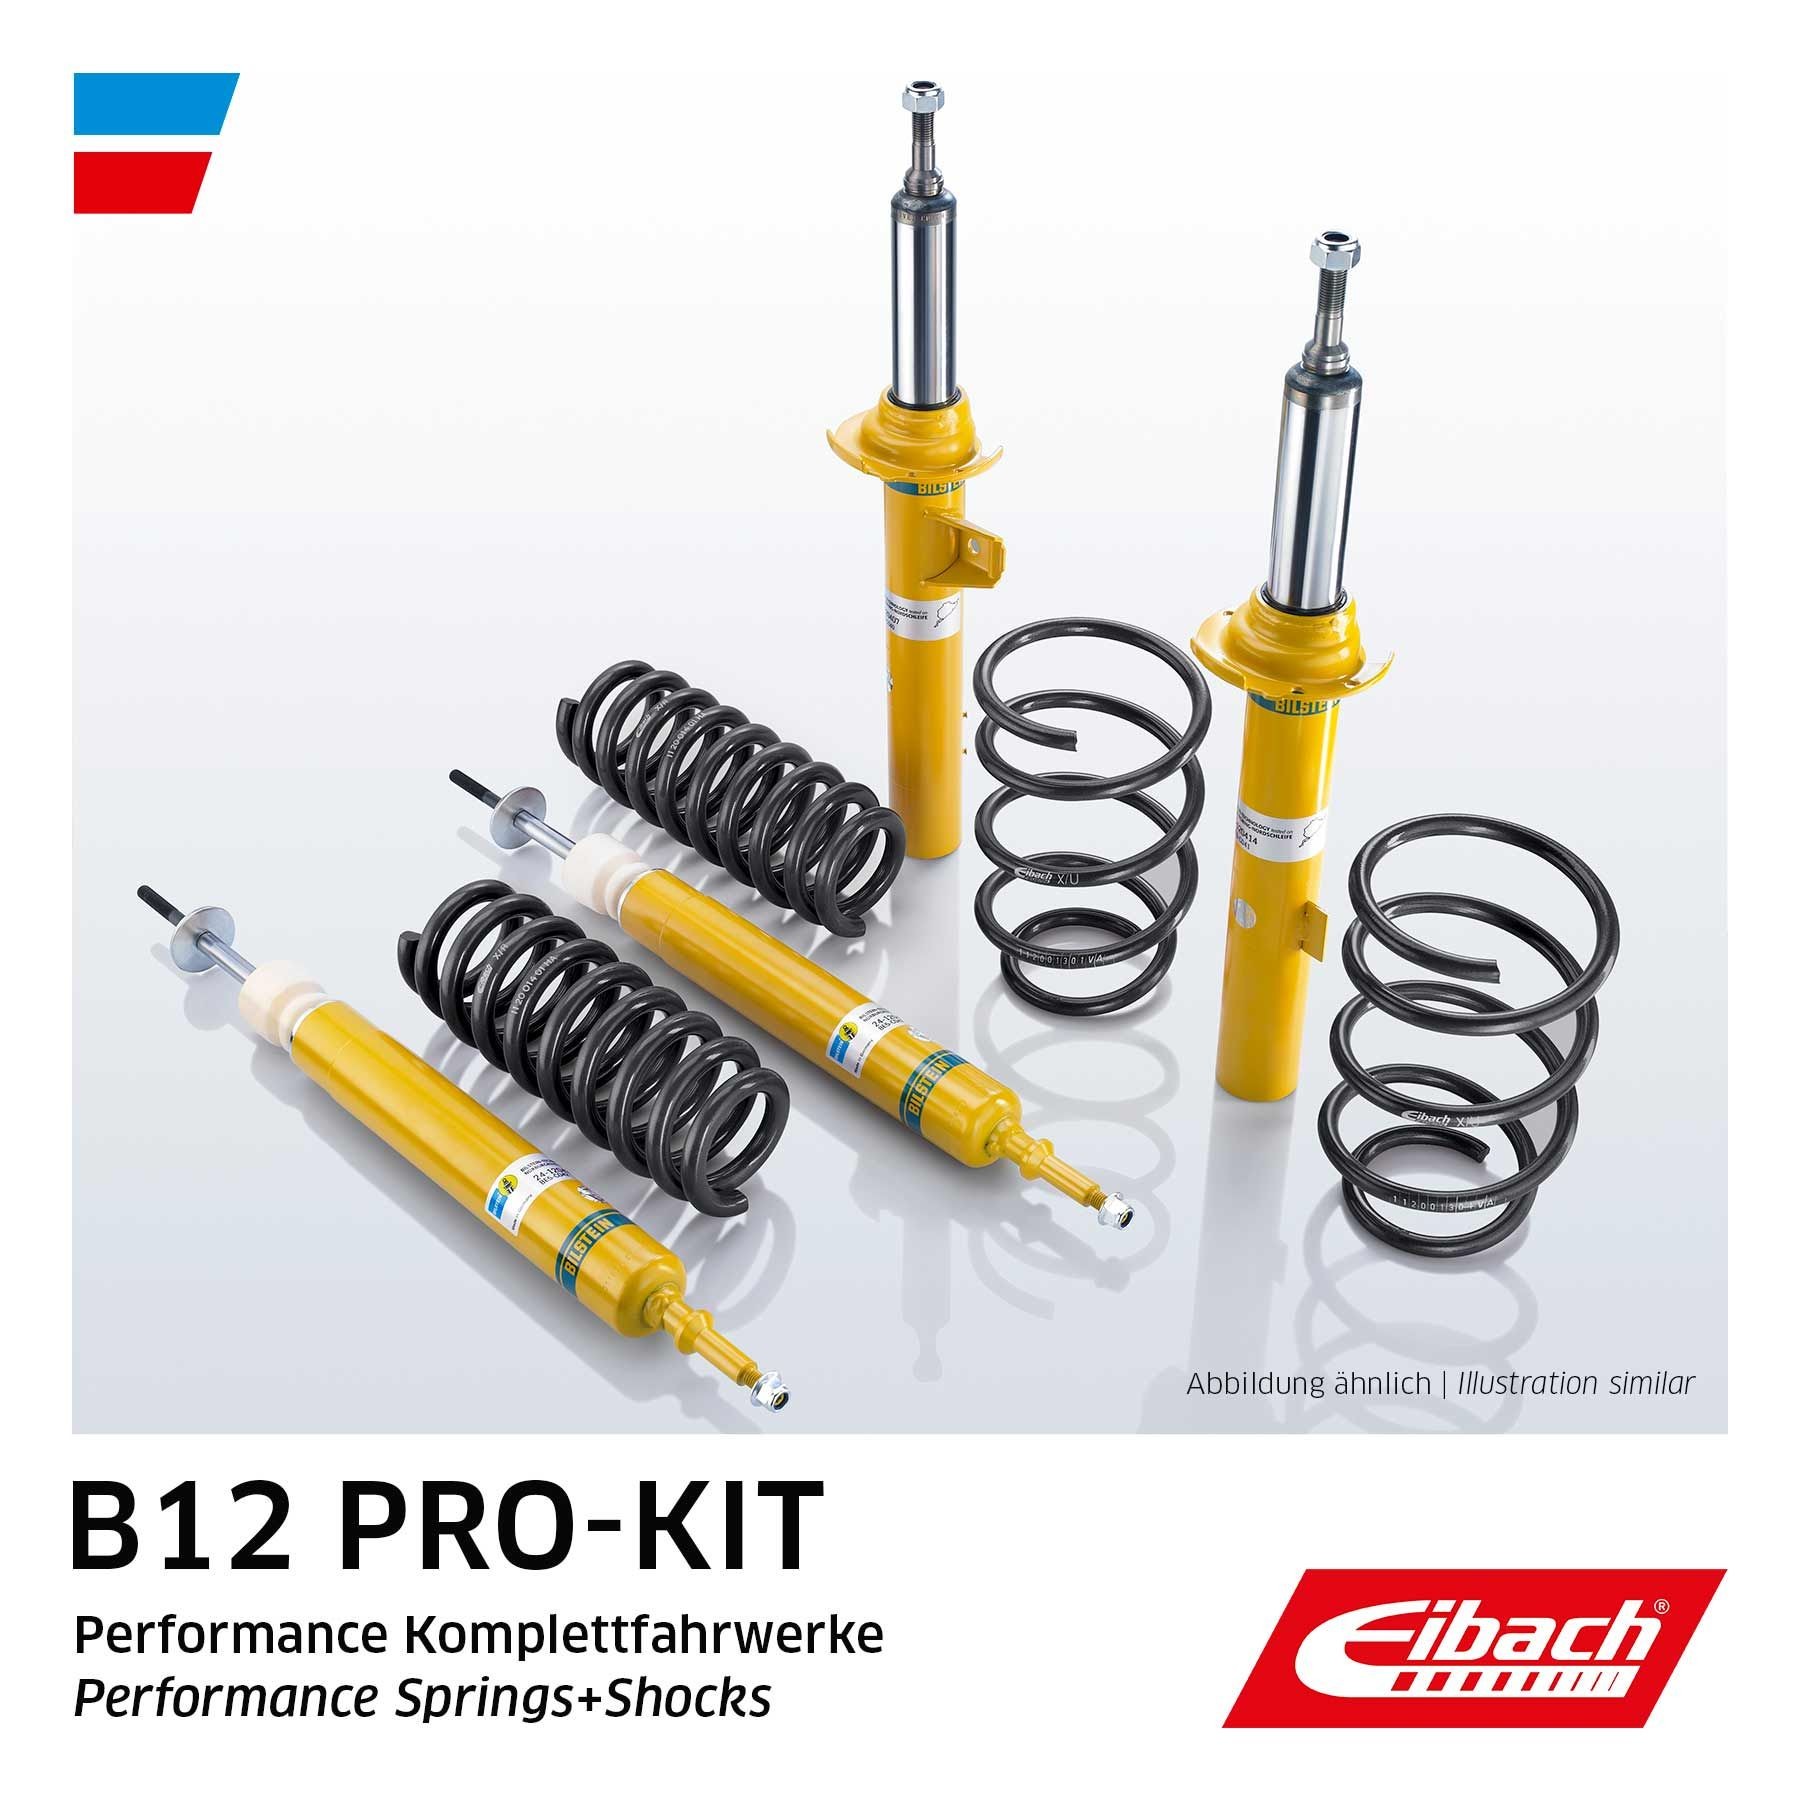 EIBACH Suspension kit, coil springs / shock absorbers VW GOLF 1 (17) new E90-15-021-16-22